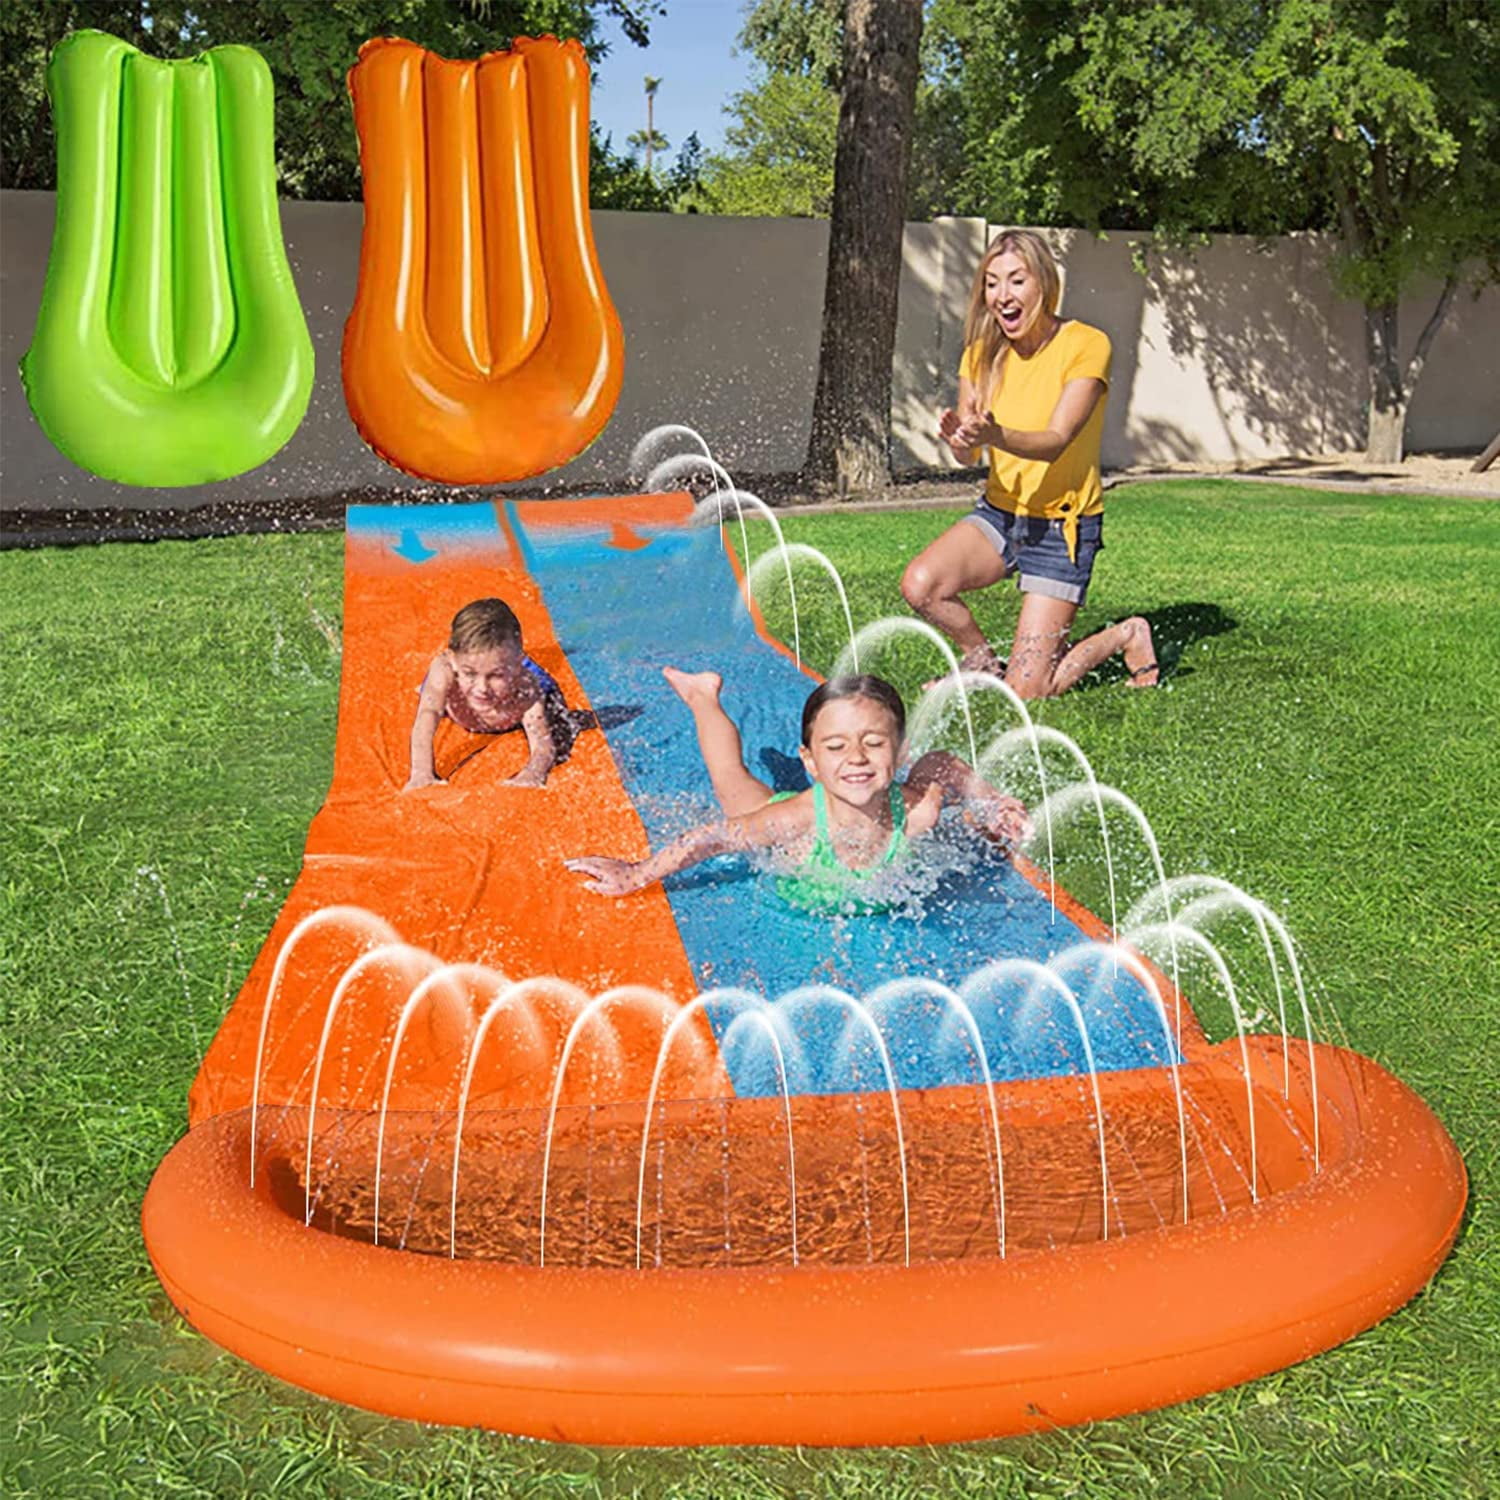 Triple Lane Inflatable Slip N Slide Aqua Splash to Have Outdoor Water Fun with All Family. This Big Sprinkler Race Kiddie Blow Up Above Ground Long Waterslide is Great for Kids & Children 